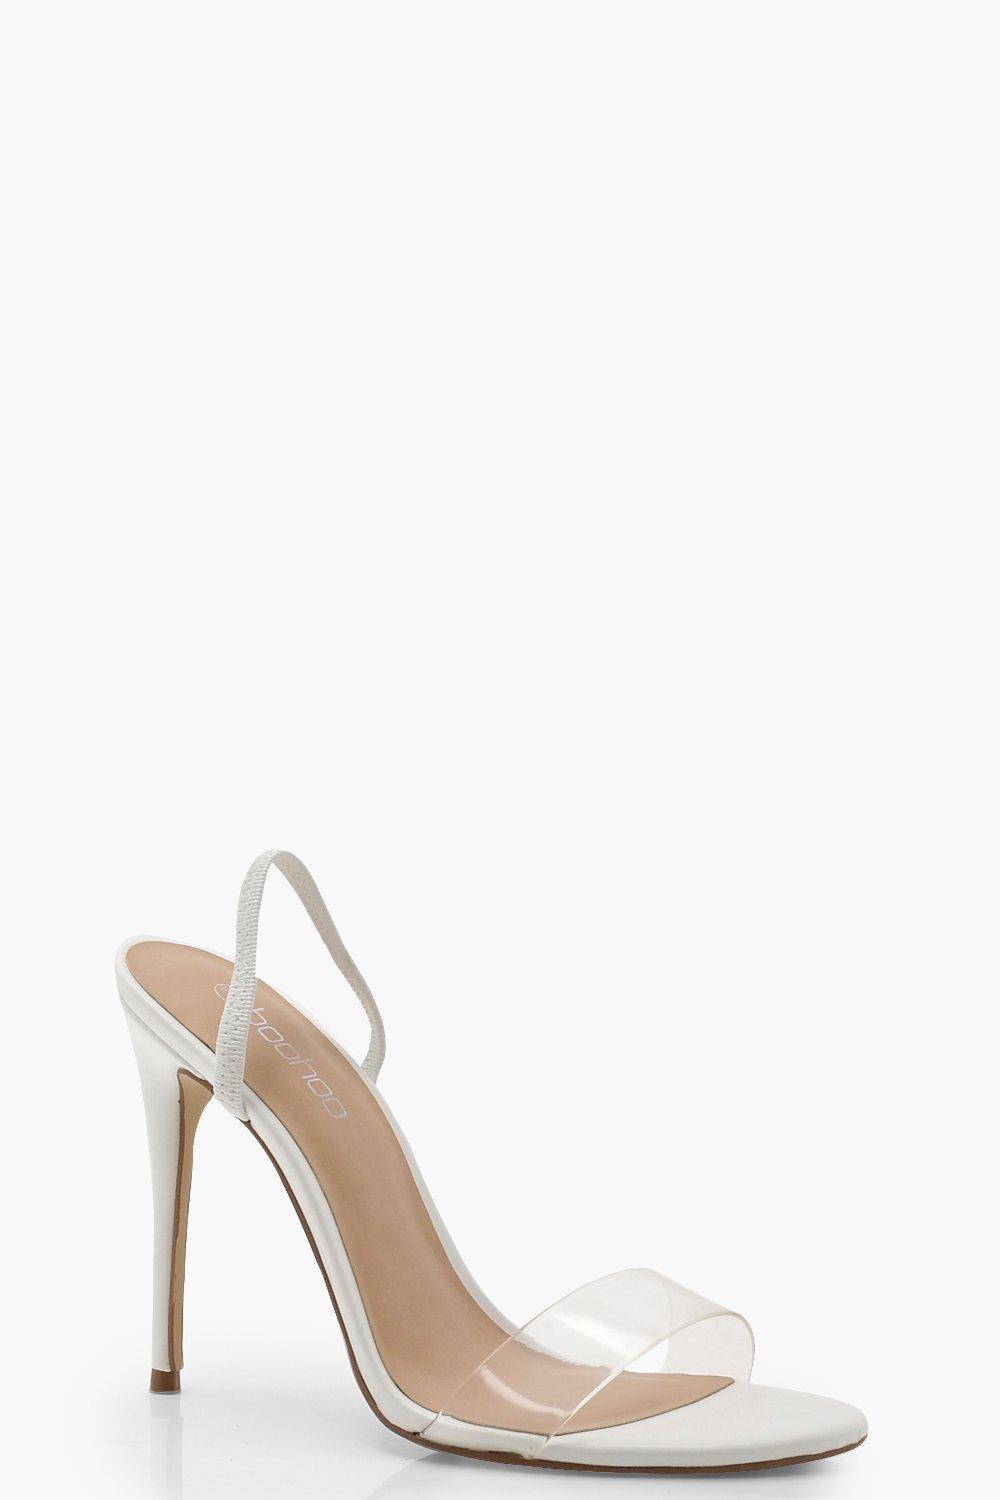 white heels clear strap